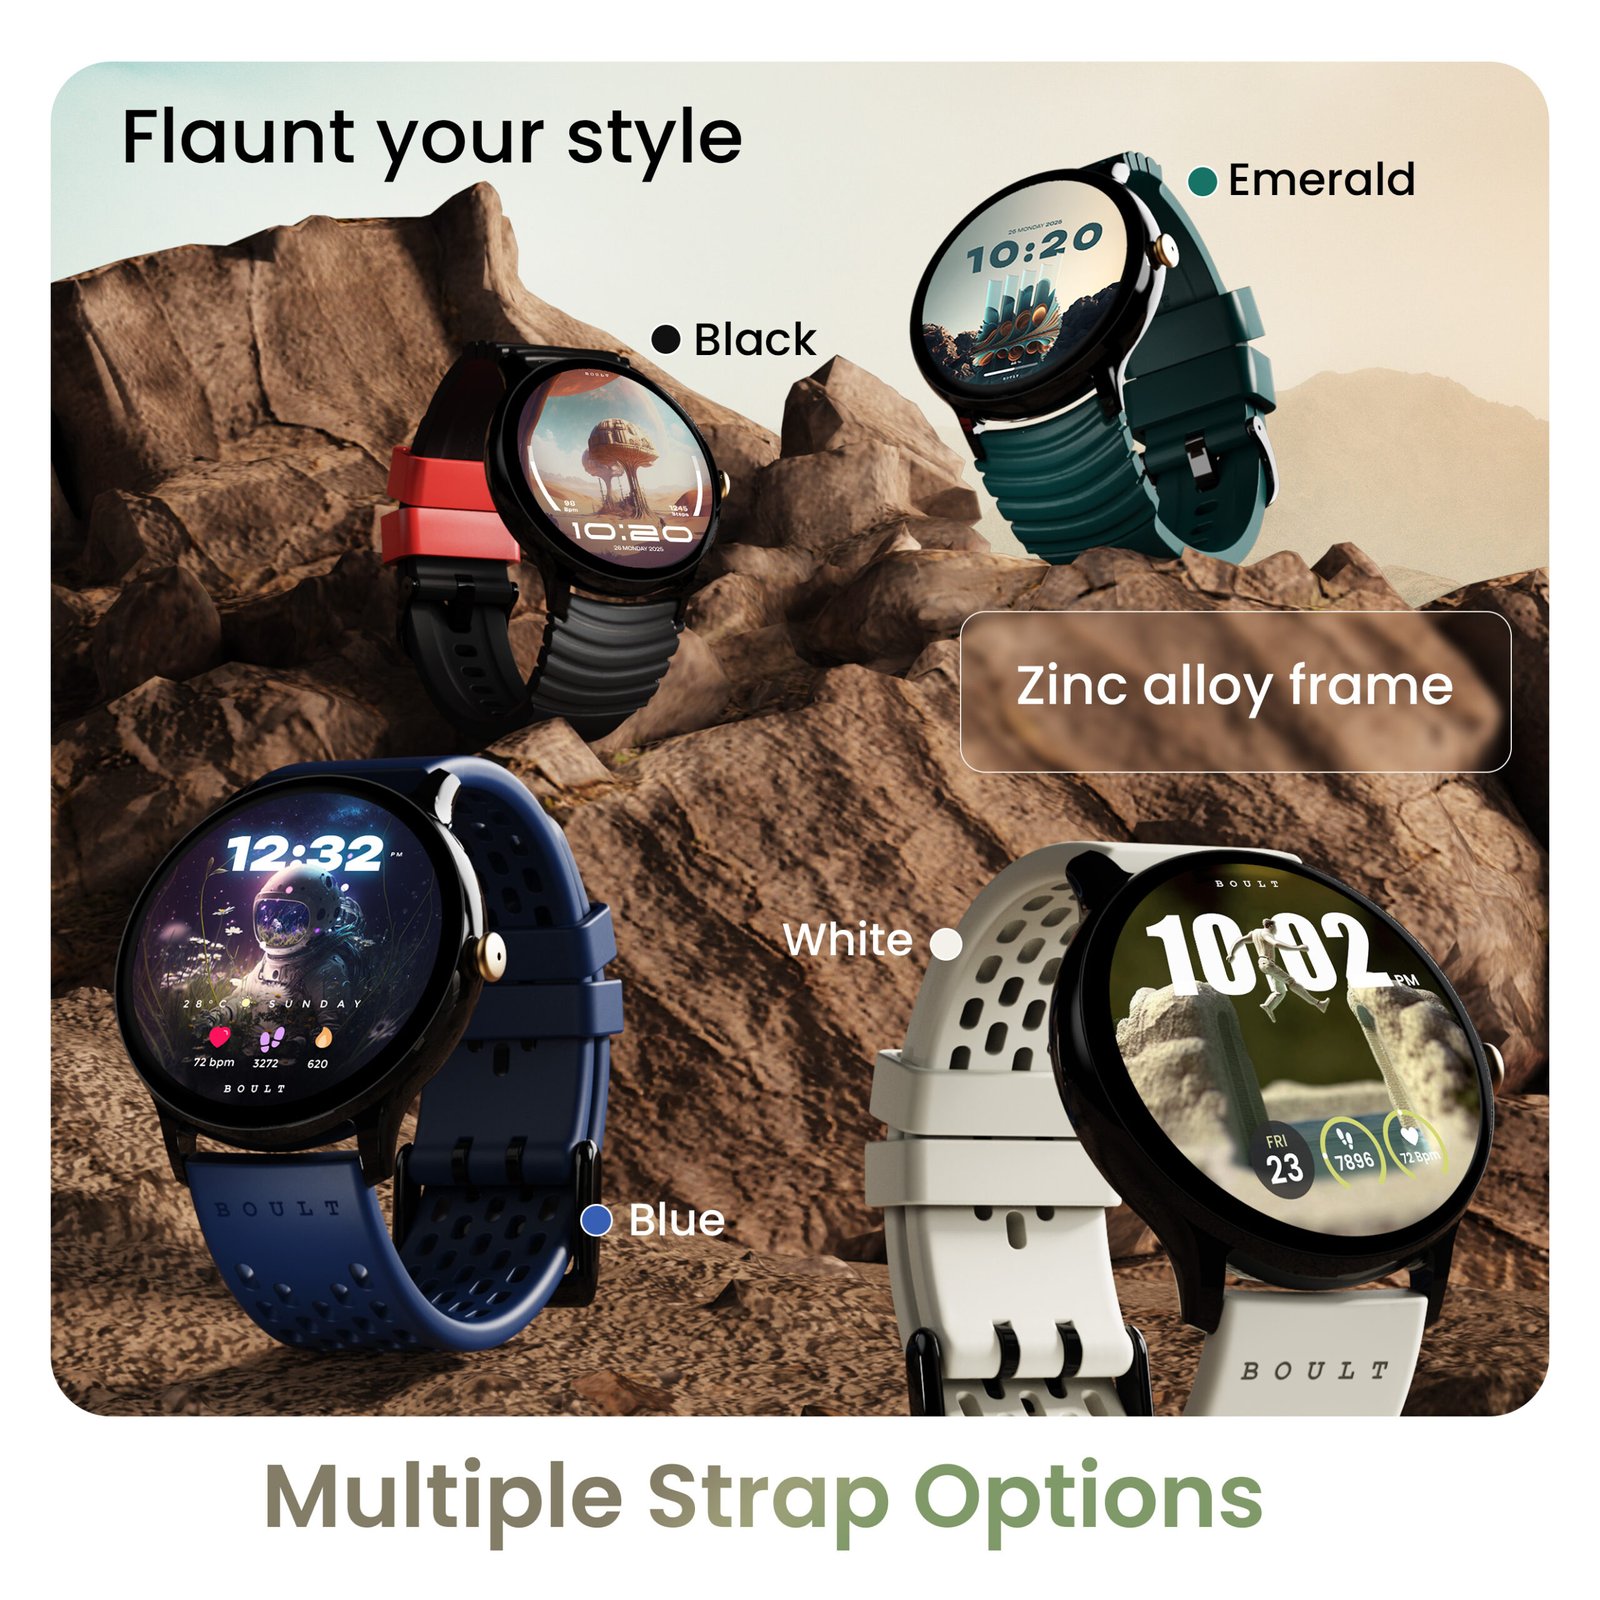 Boult Brings Cutting-Edge Innovation with Majestic ‘Striker Plus’, New Smartwatch Boasts a 1.39’’ Round HD Display